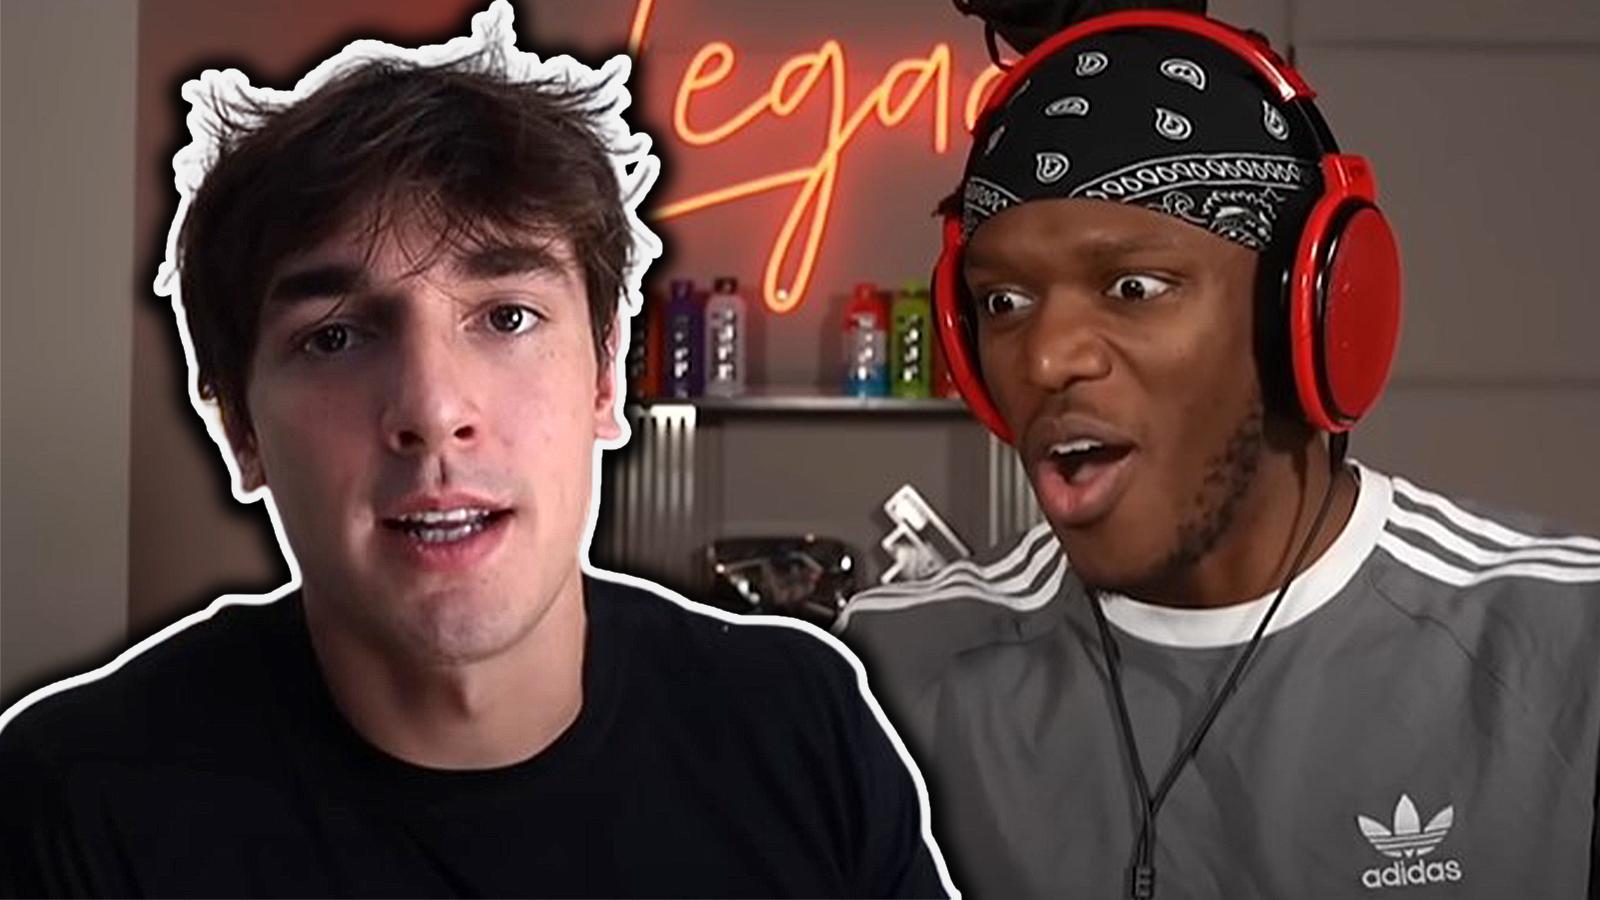 Bryce Hall hits back at KSI over Deji fight comments